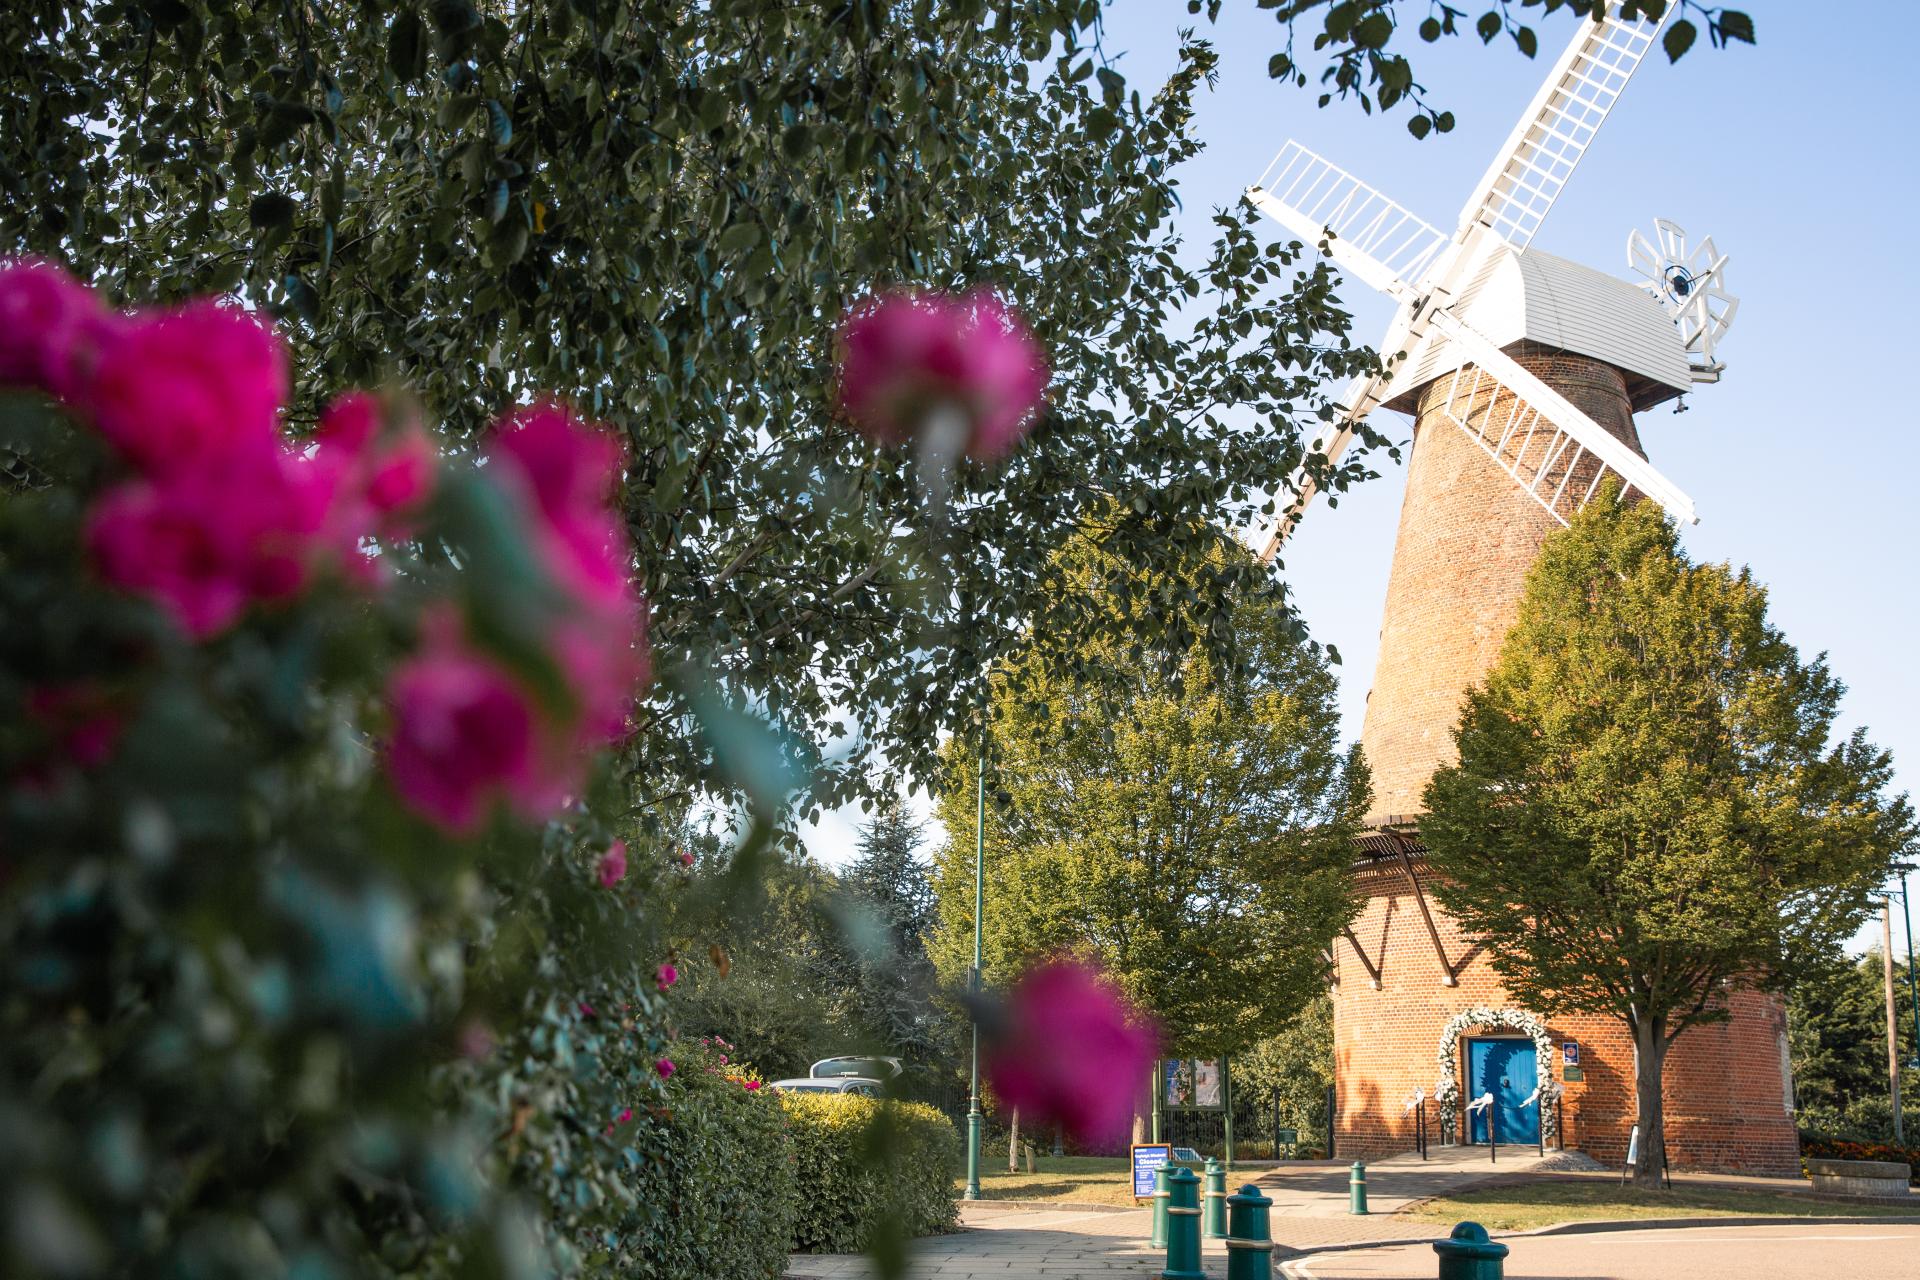 Windmill external with pink flowers